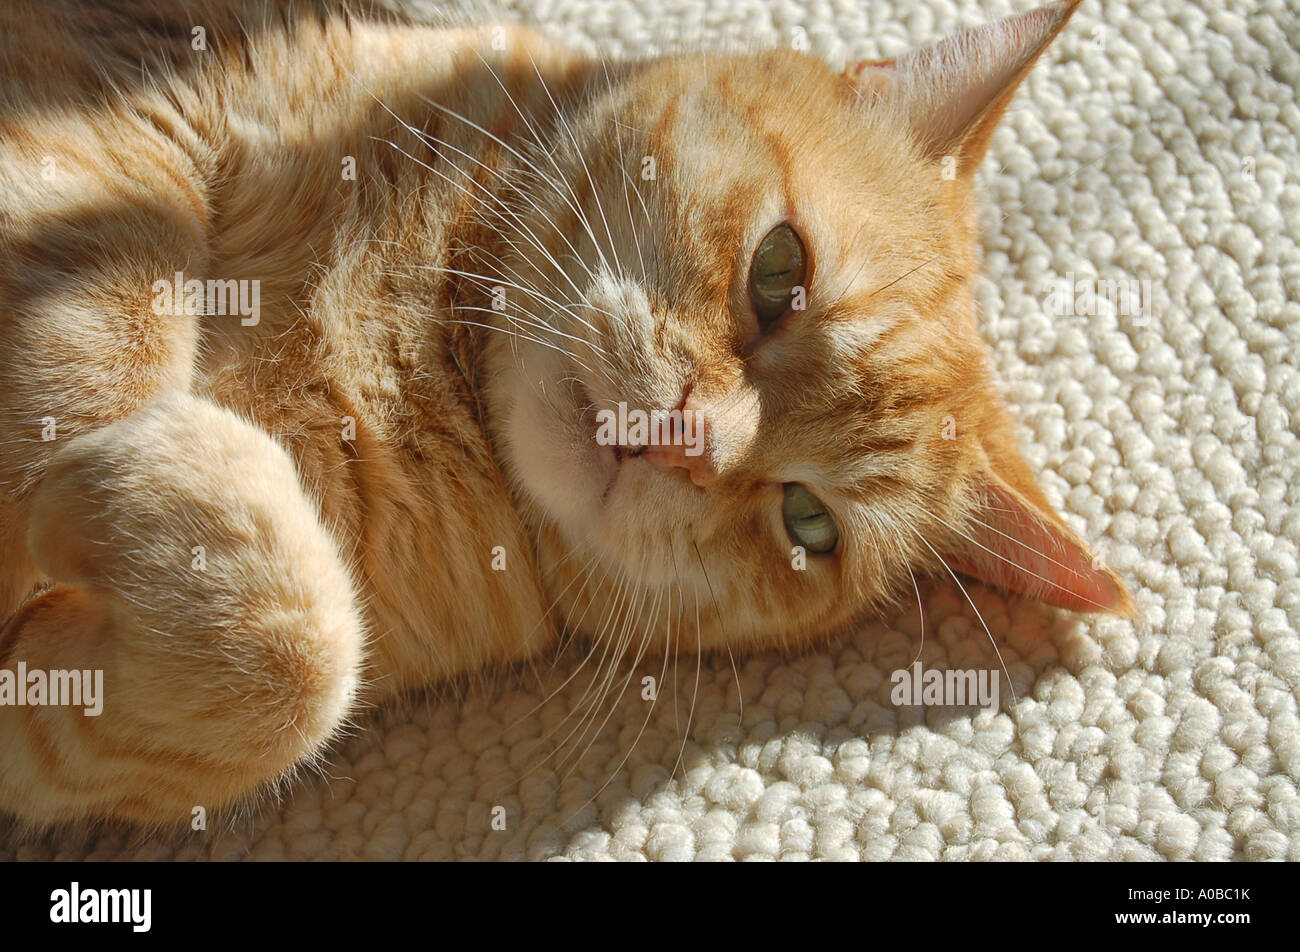 Yellow striped cat with green eyes sitting in the sun Stock Photo